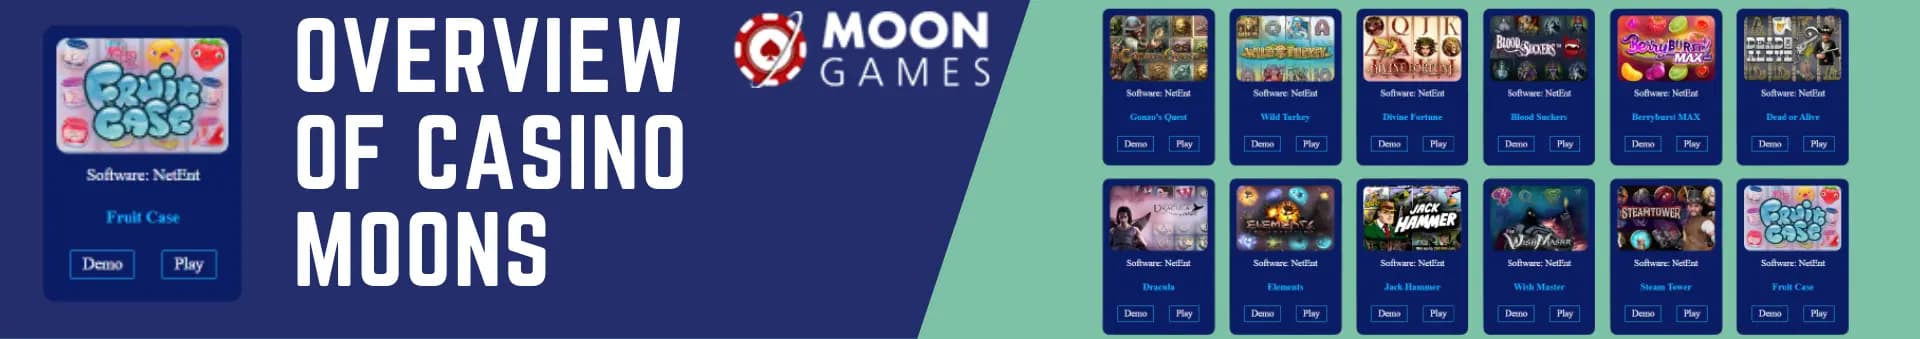 casino-moons-overview